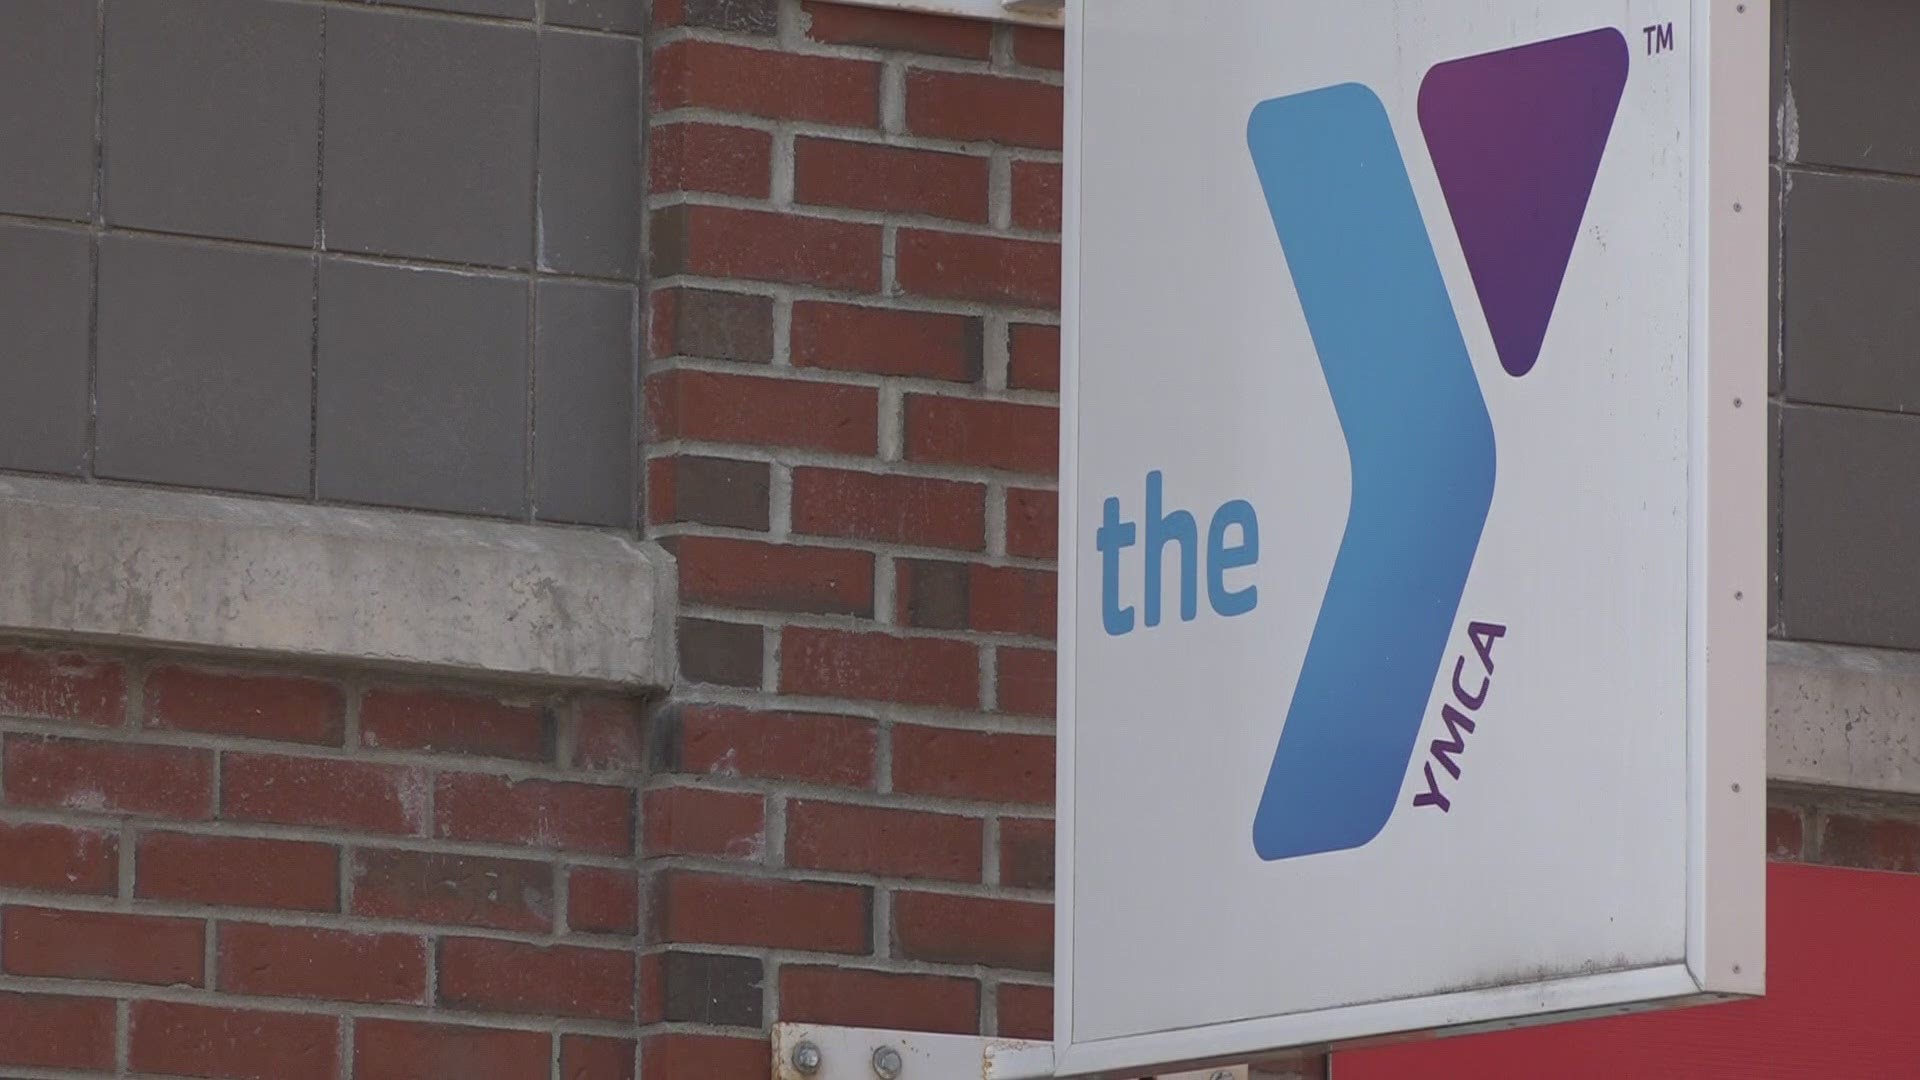 A part-time employee at the Bangor YMCA has tested positive for Covid-19. The 44 children who may have been exposed are now quarantined for the next 14 days.